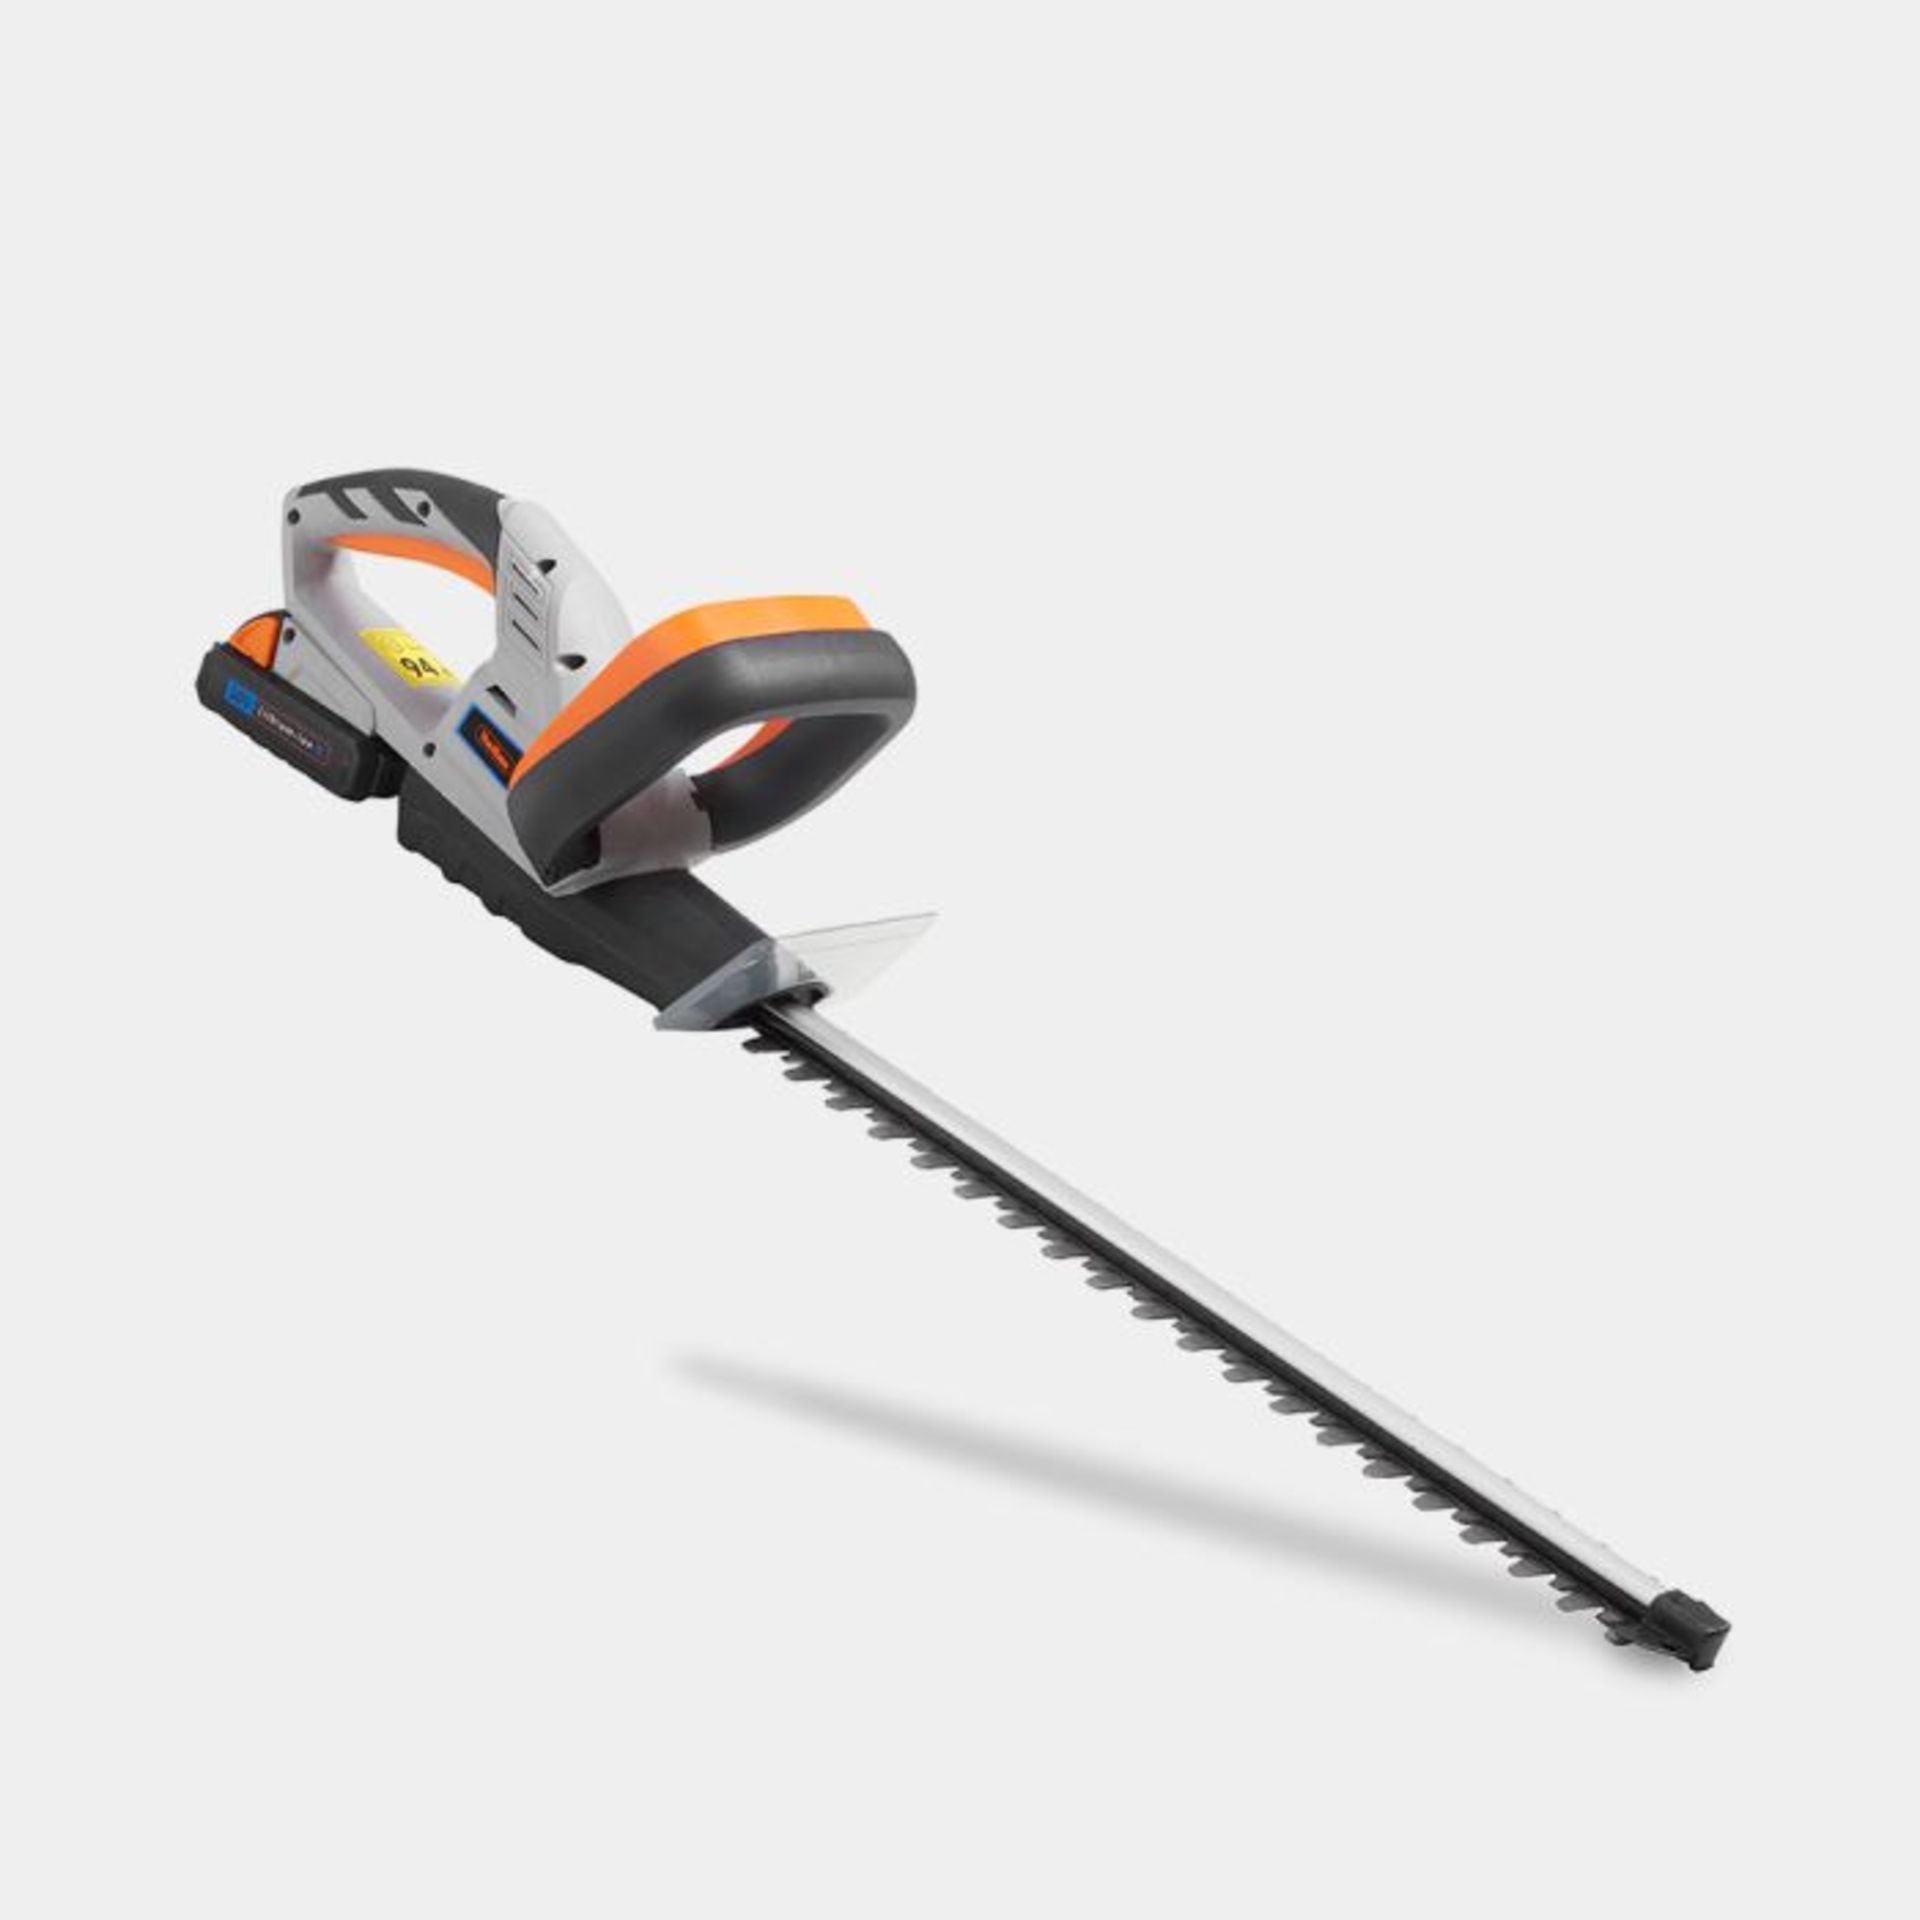 G-series Cordless Hedge Trimmer. - Er36. Don’t waste your energy with manual hedge trimming. The